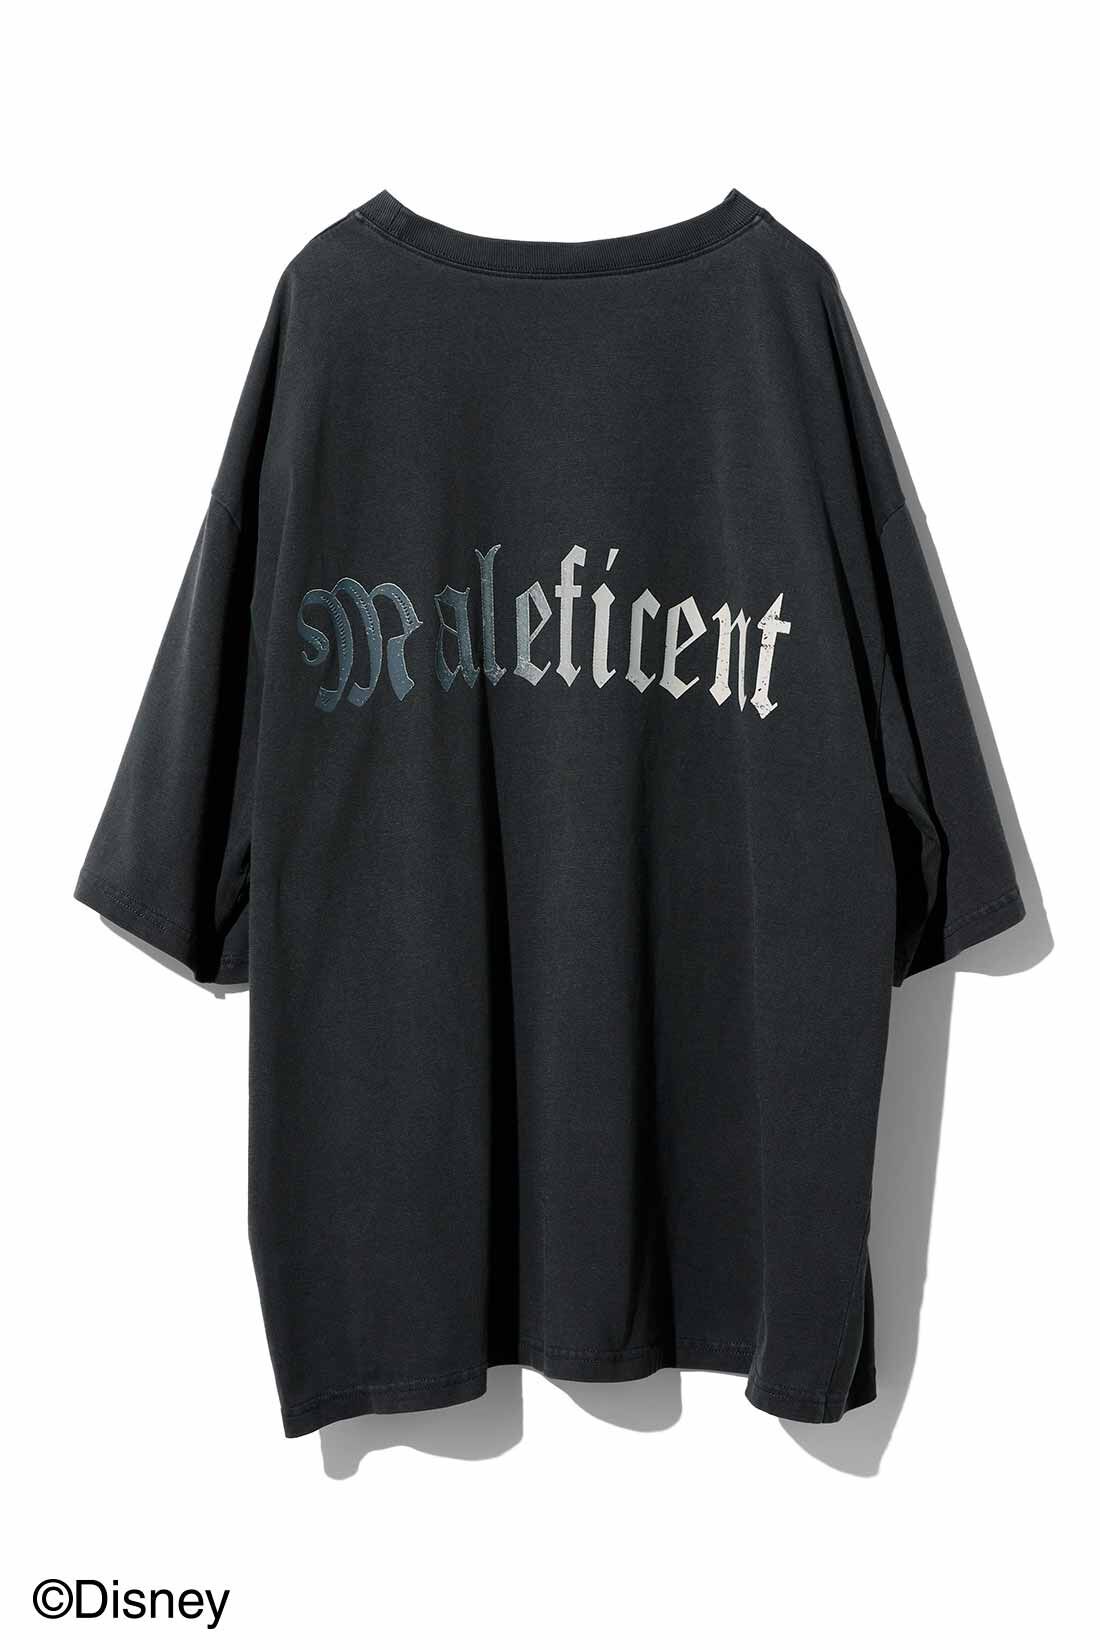 MEDE19F|MEDE19F　MEDE19F 【Disney】古着屋でみつけたようなプリントTシャツ〈マレフィセント〉|後ろには「maleficent」のロゴ。